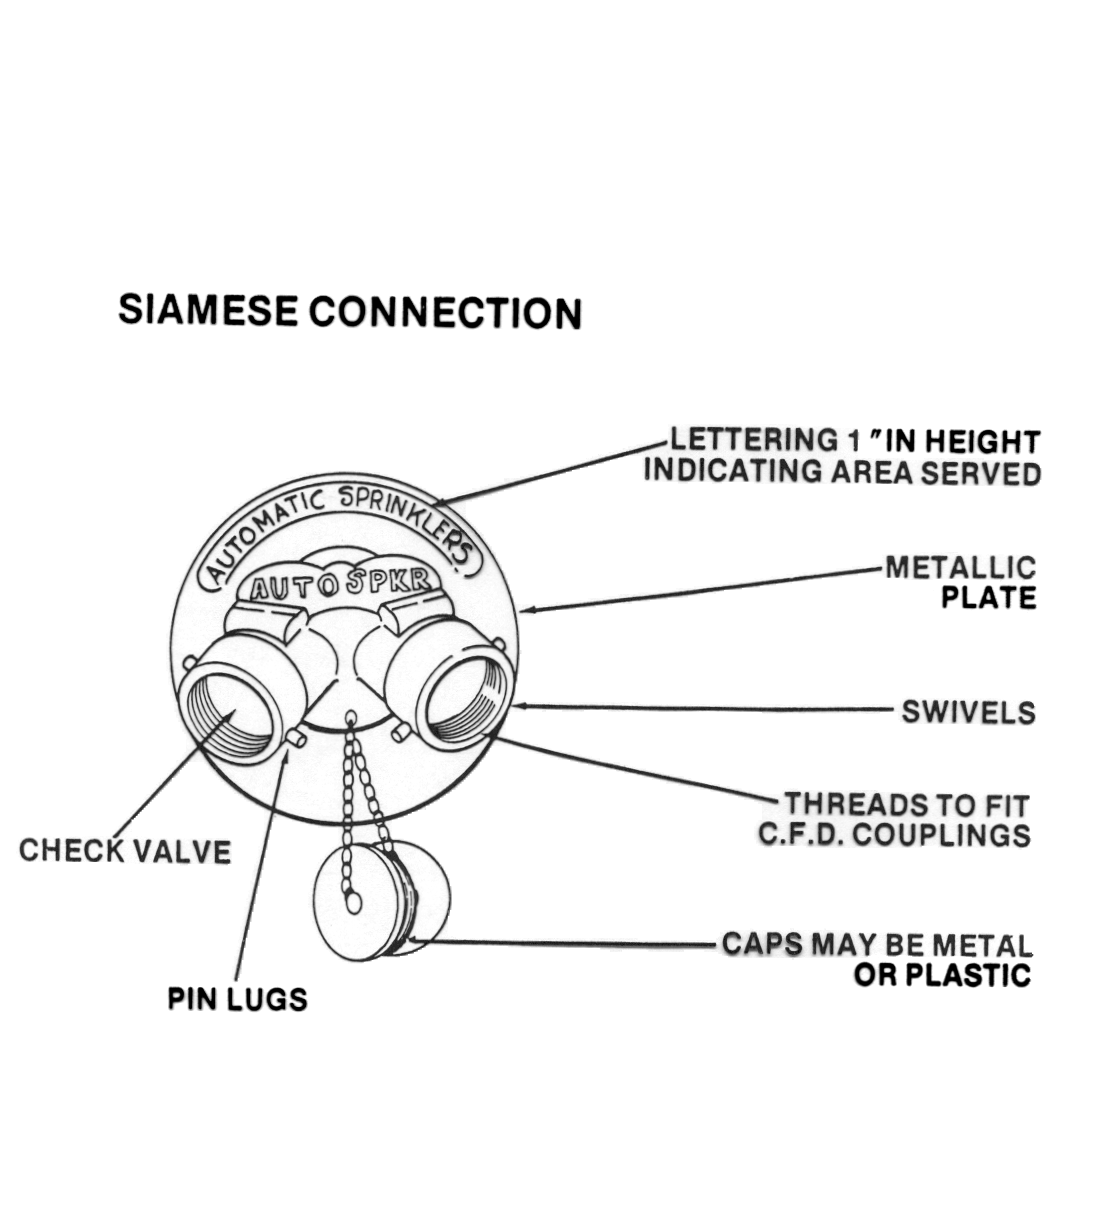 Siamese Connection